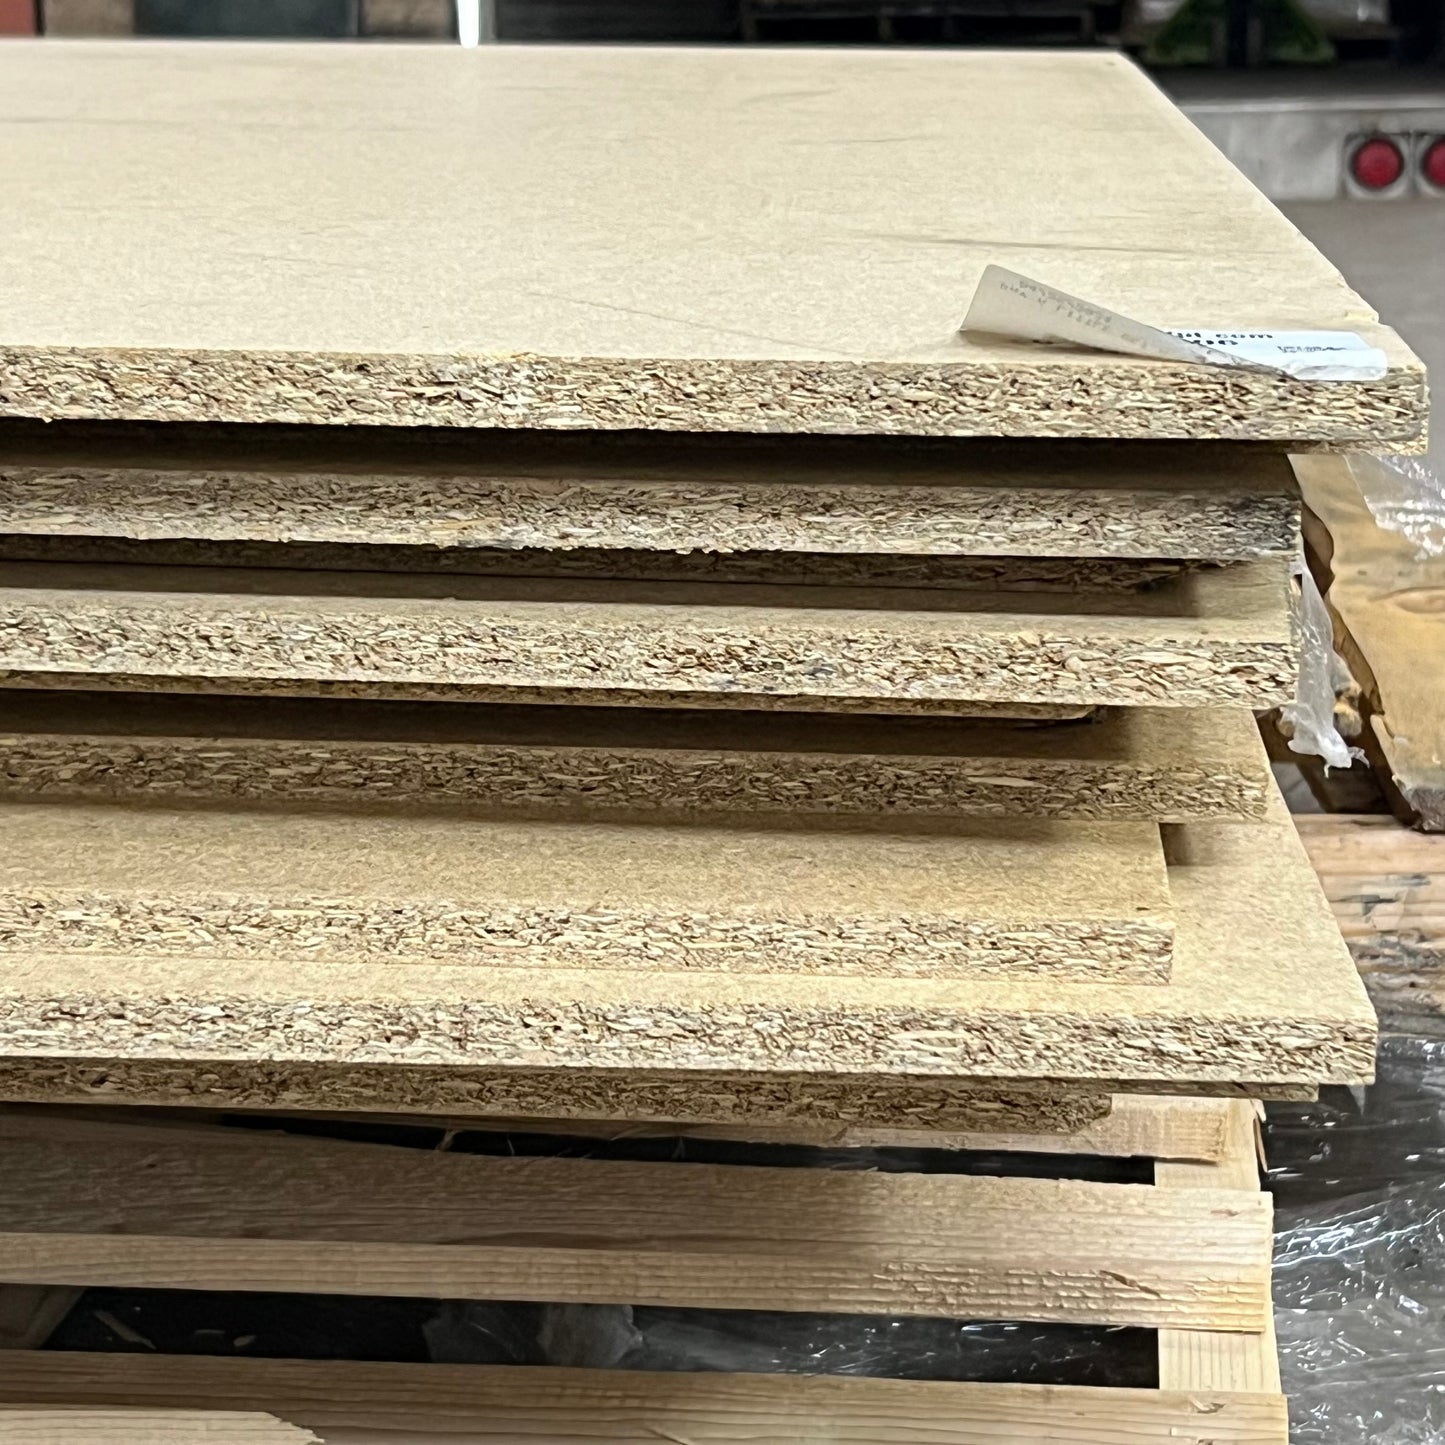 Particle Board 16 PK of 60"x36"x3/4" Sheets Damaged Corners